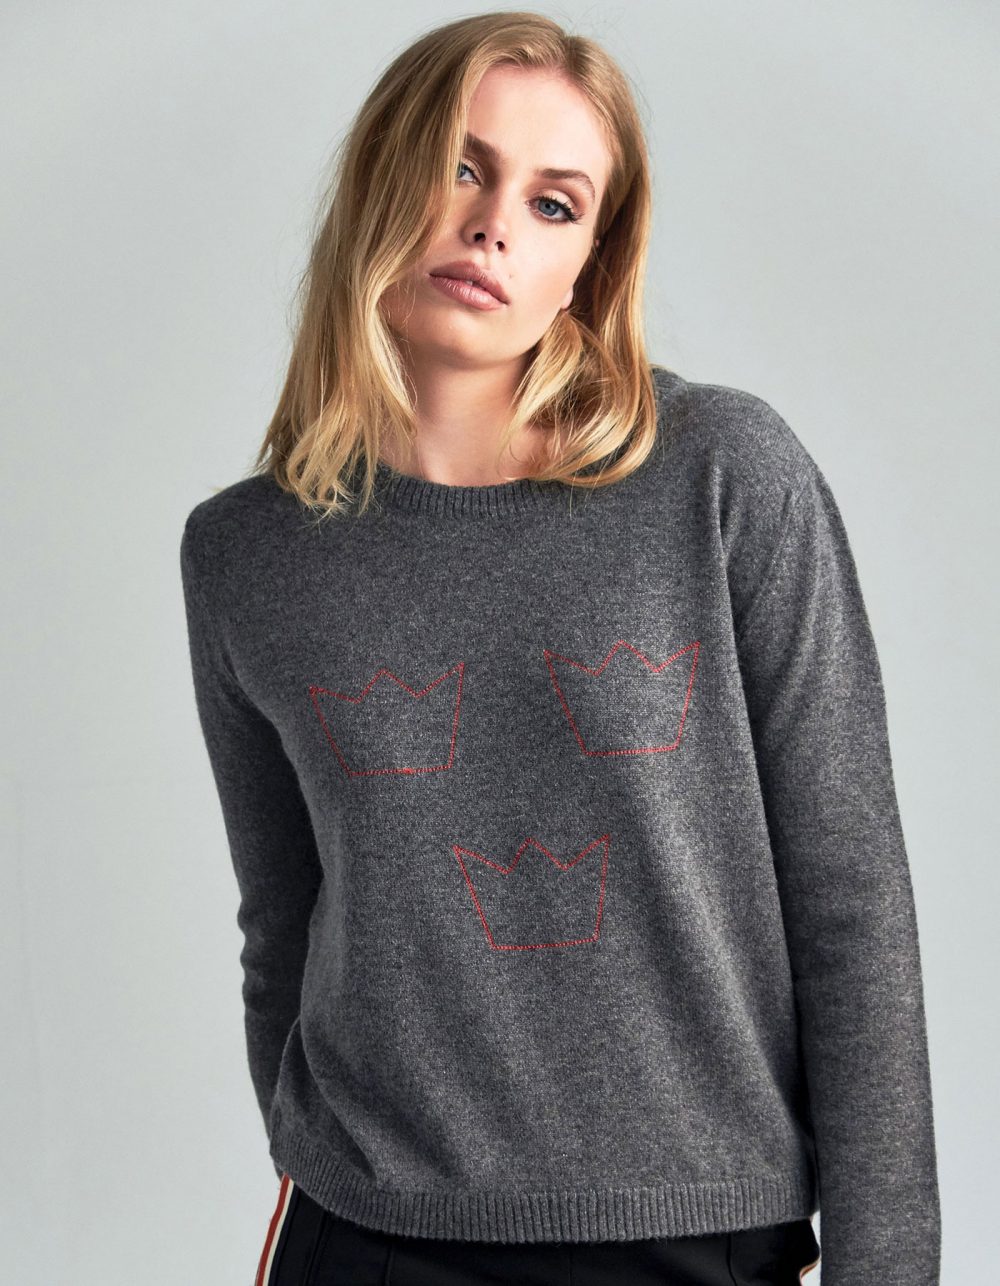 Studio image of a woman in cashmere knitwear, a malin darlin Three Crowns cashmere jumper.